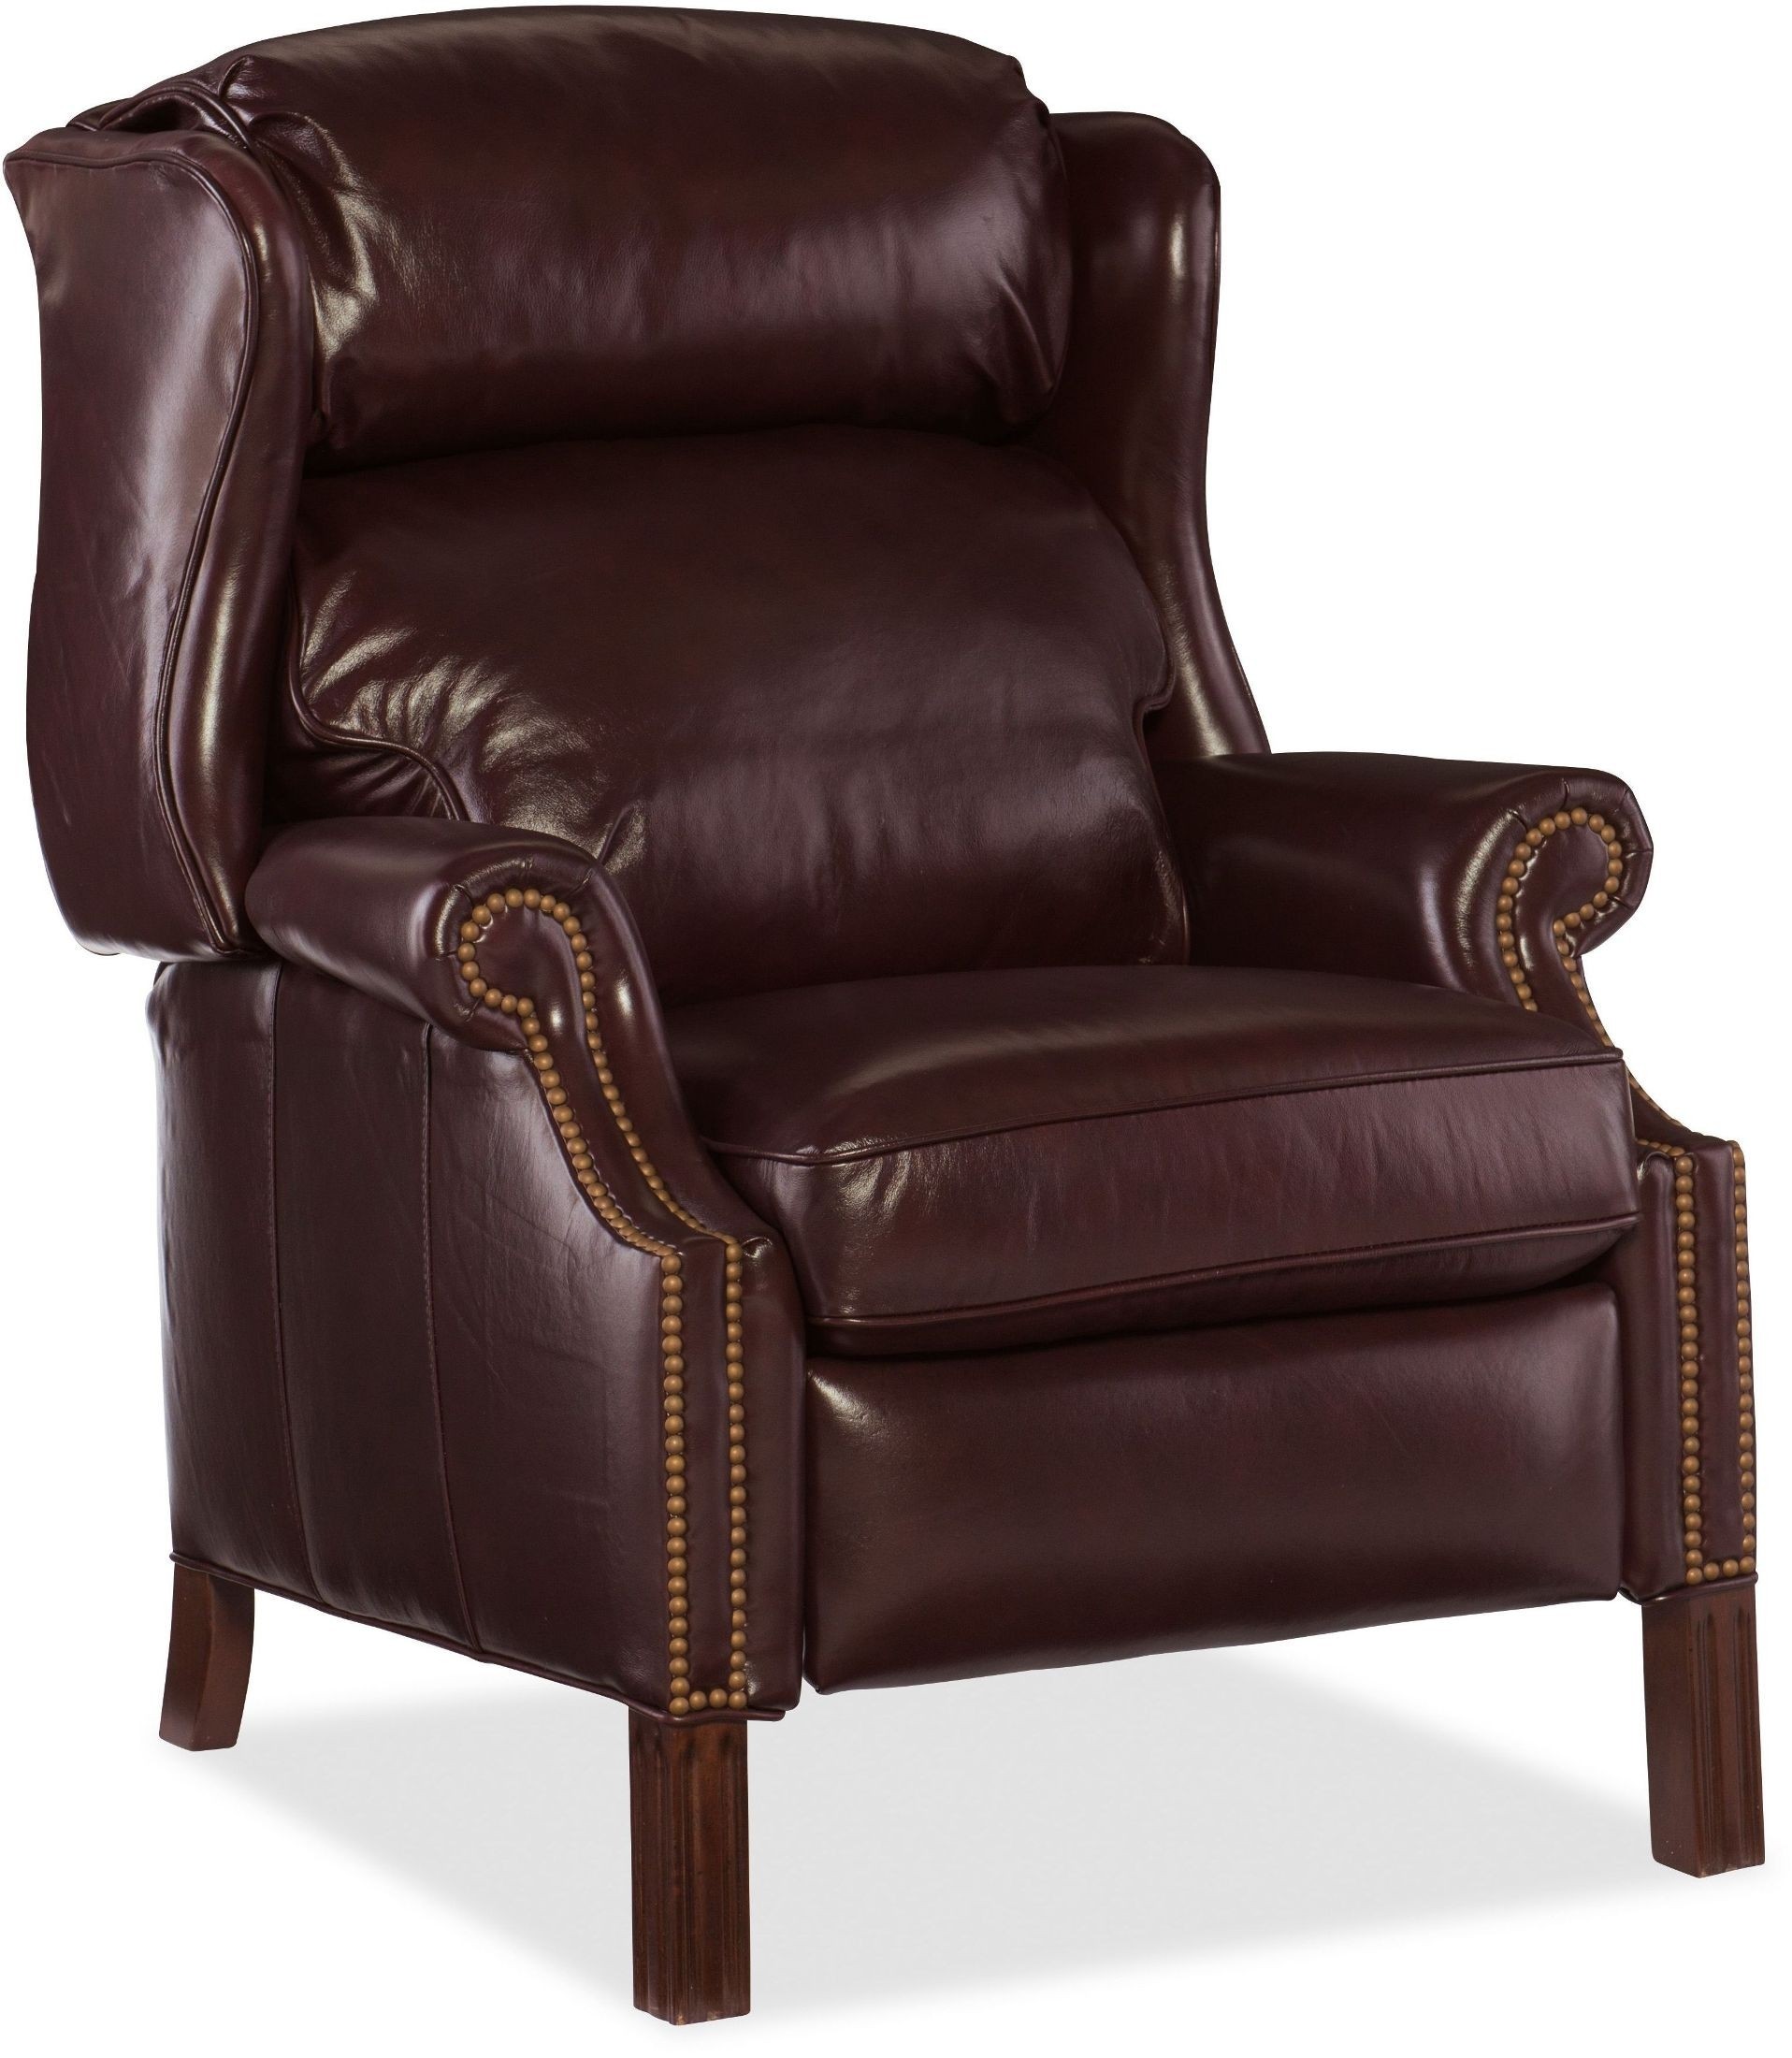 Finley red leather recliner from hooker coleman furniture